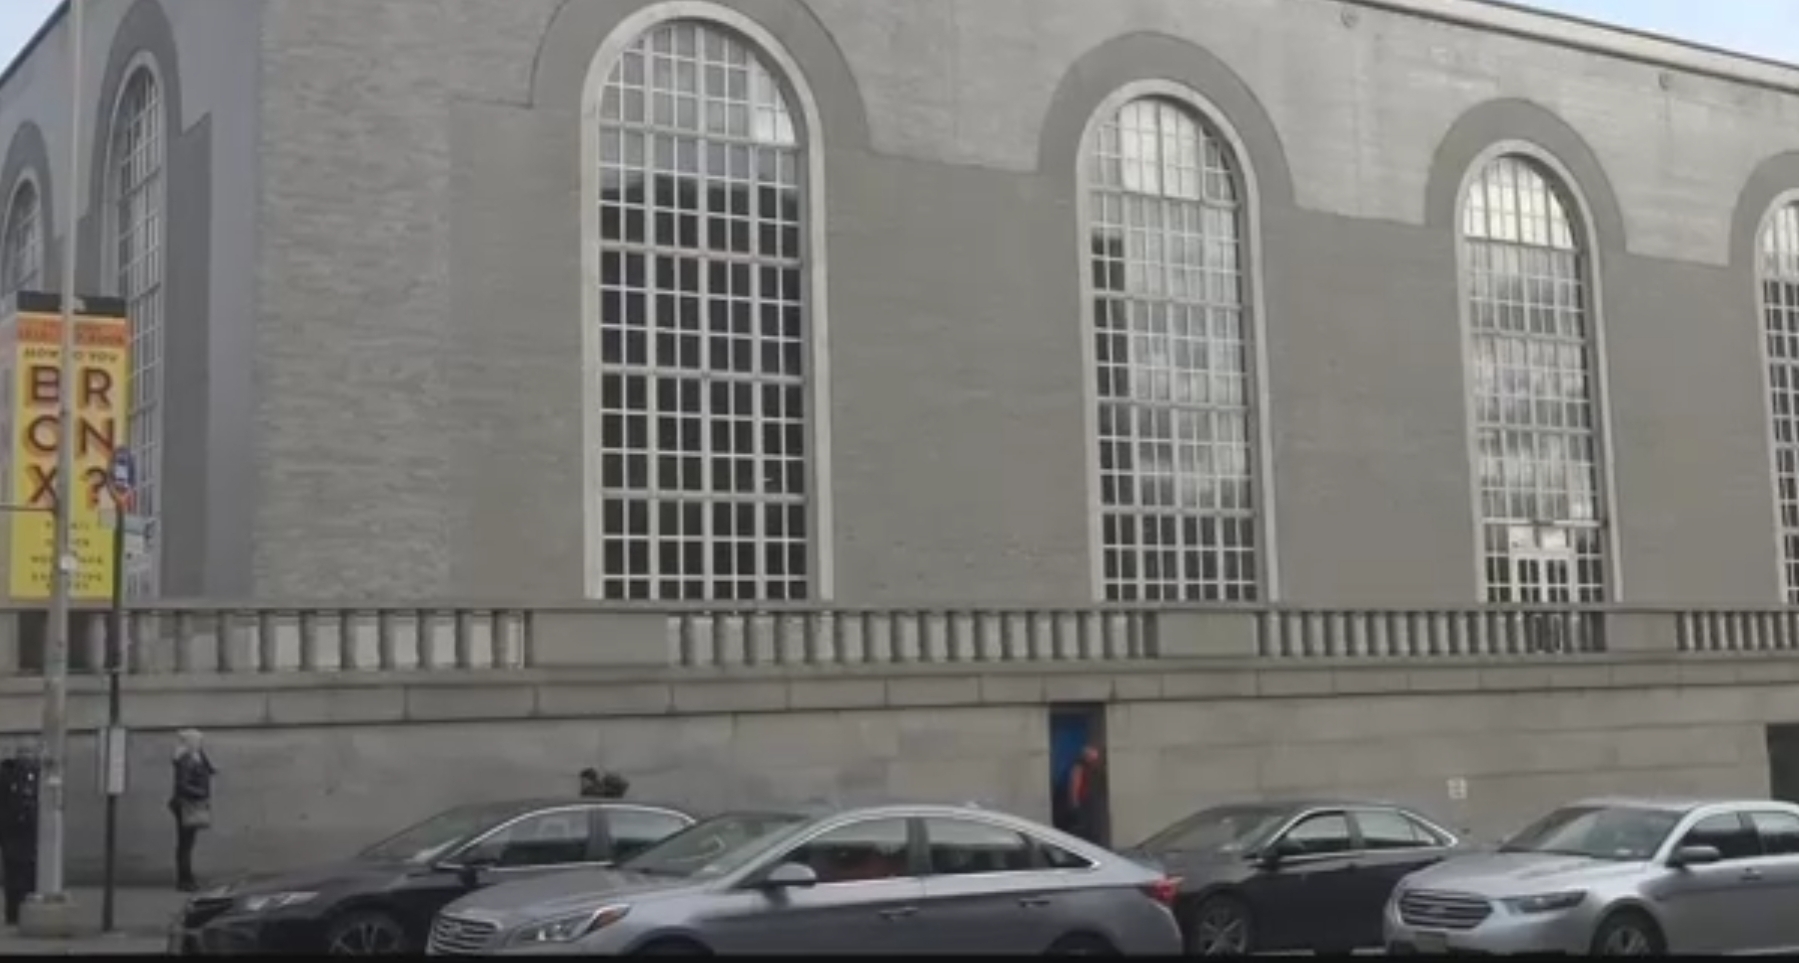 Grand Concourse Post Office to become a Shopping Center